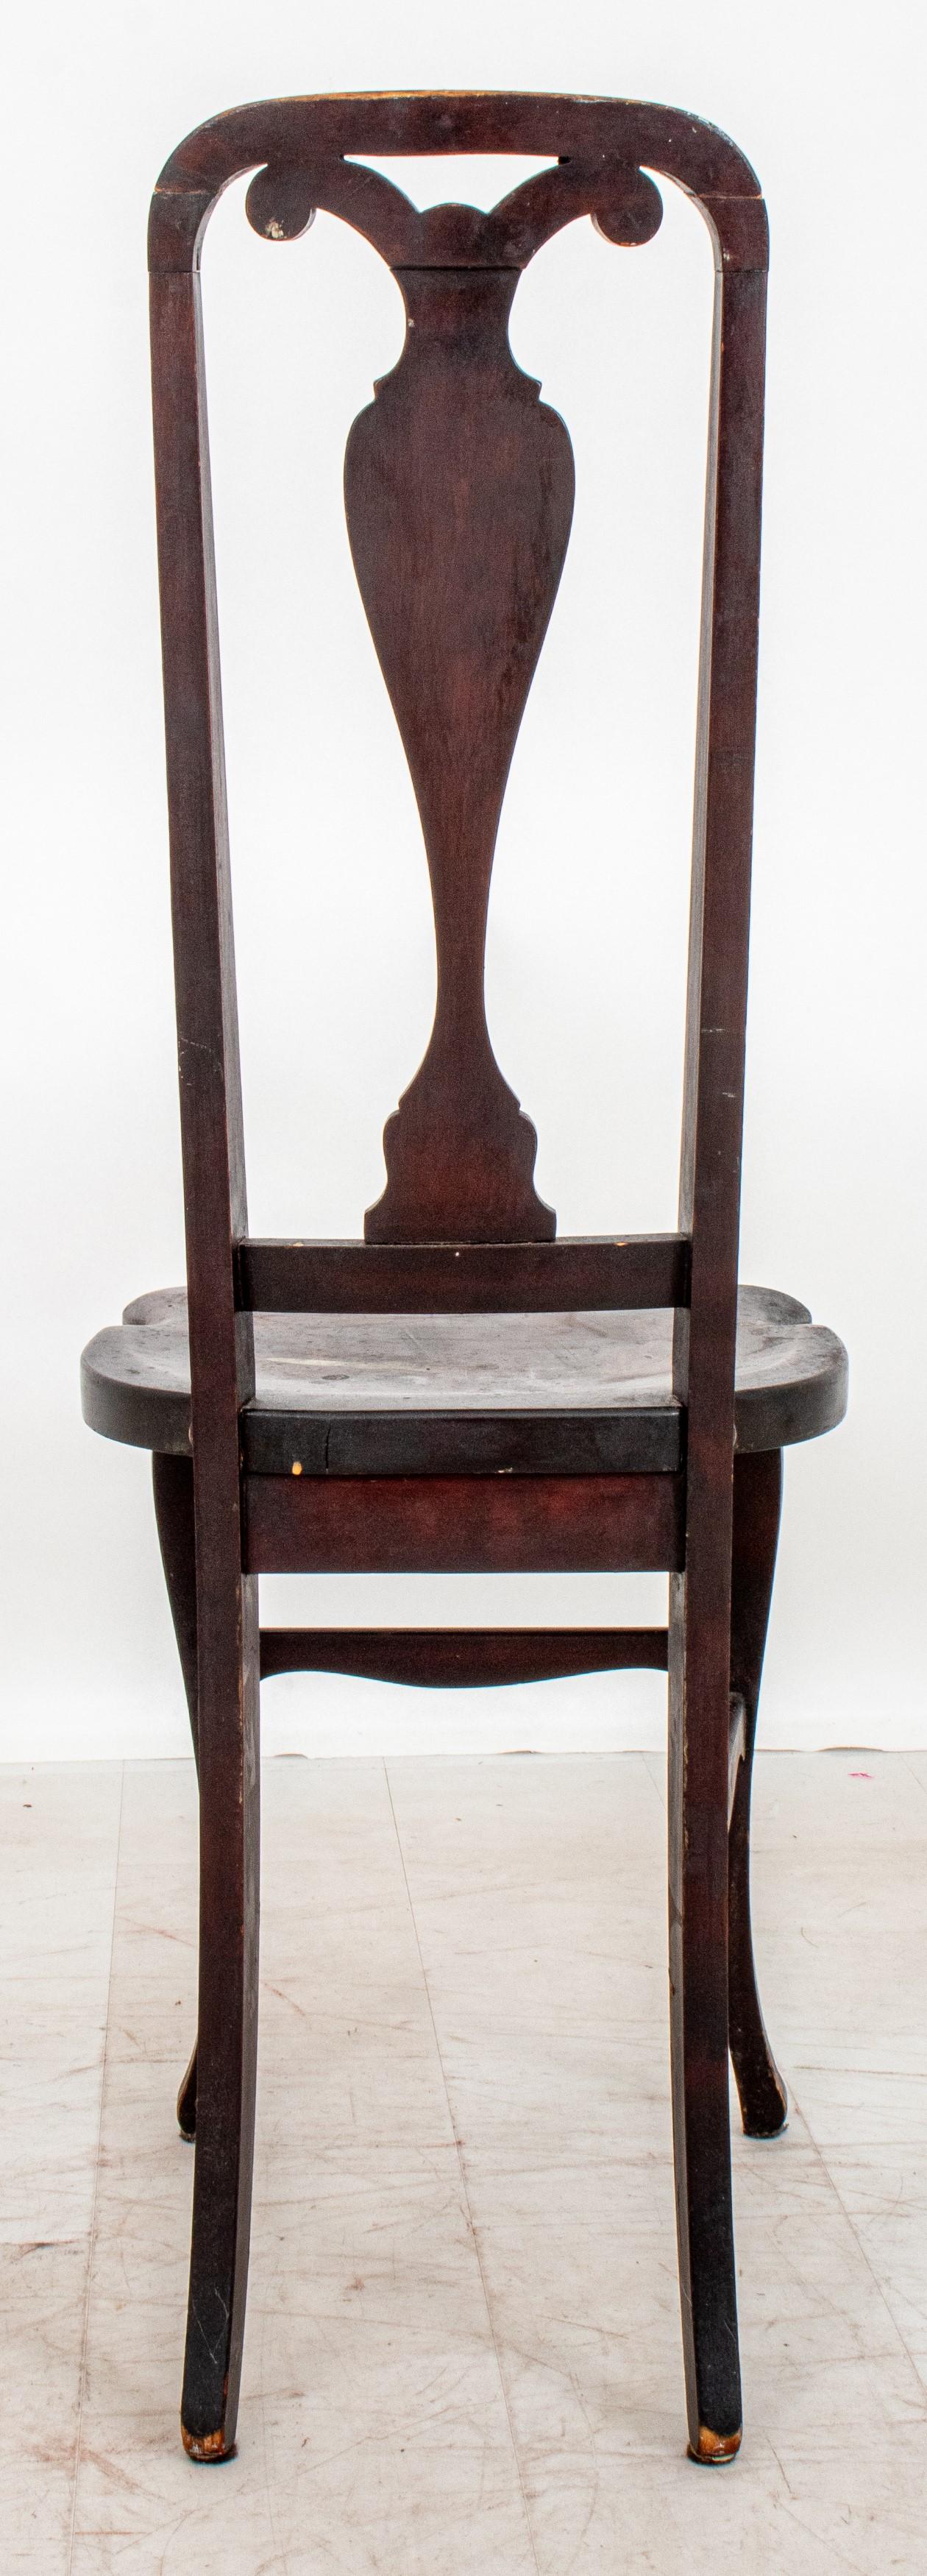 20th Century American Colonial Revival Hall Chair, ca. 1900 For Sale